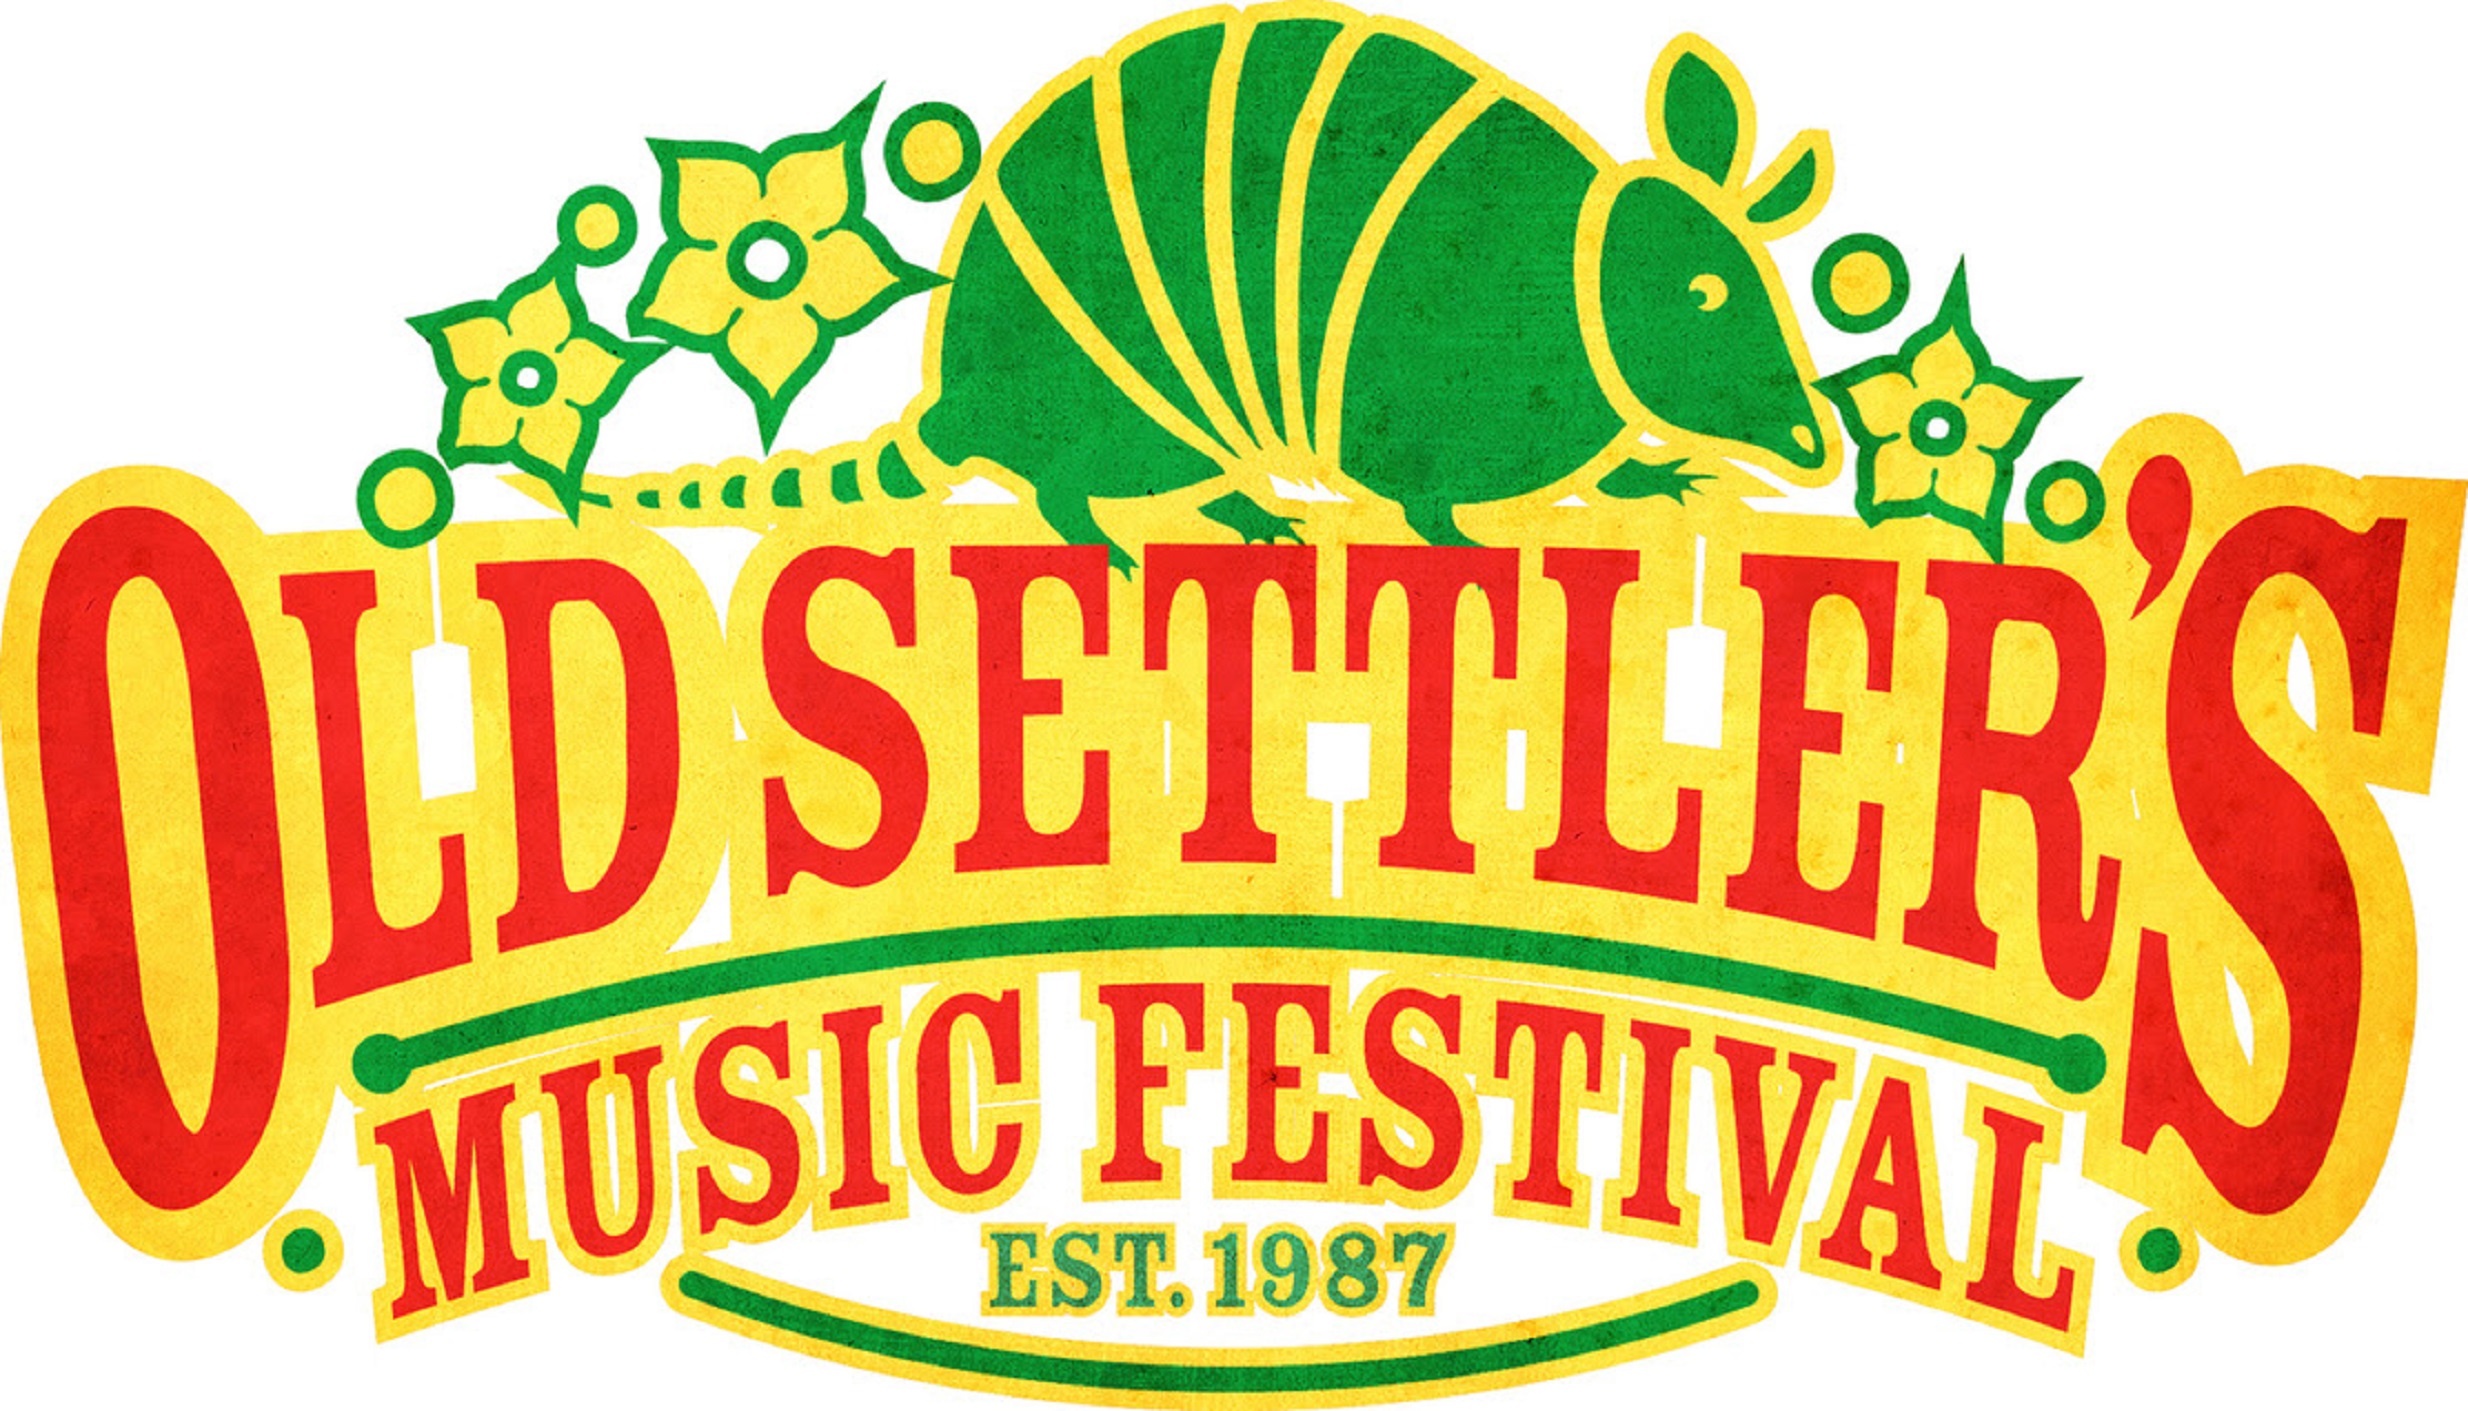 35th Old Settler's Music Festival Early Bird Tickets are Now on Sale